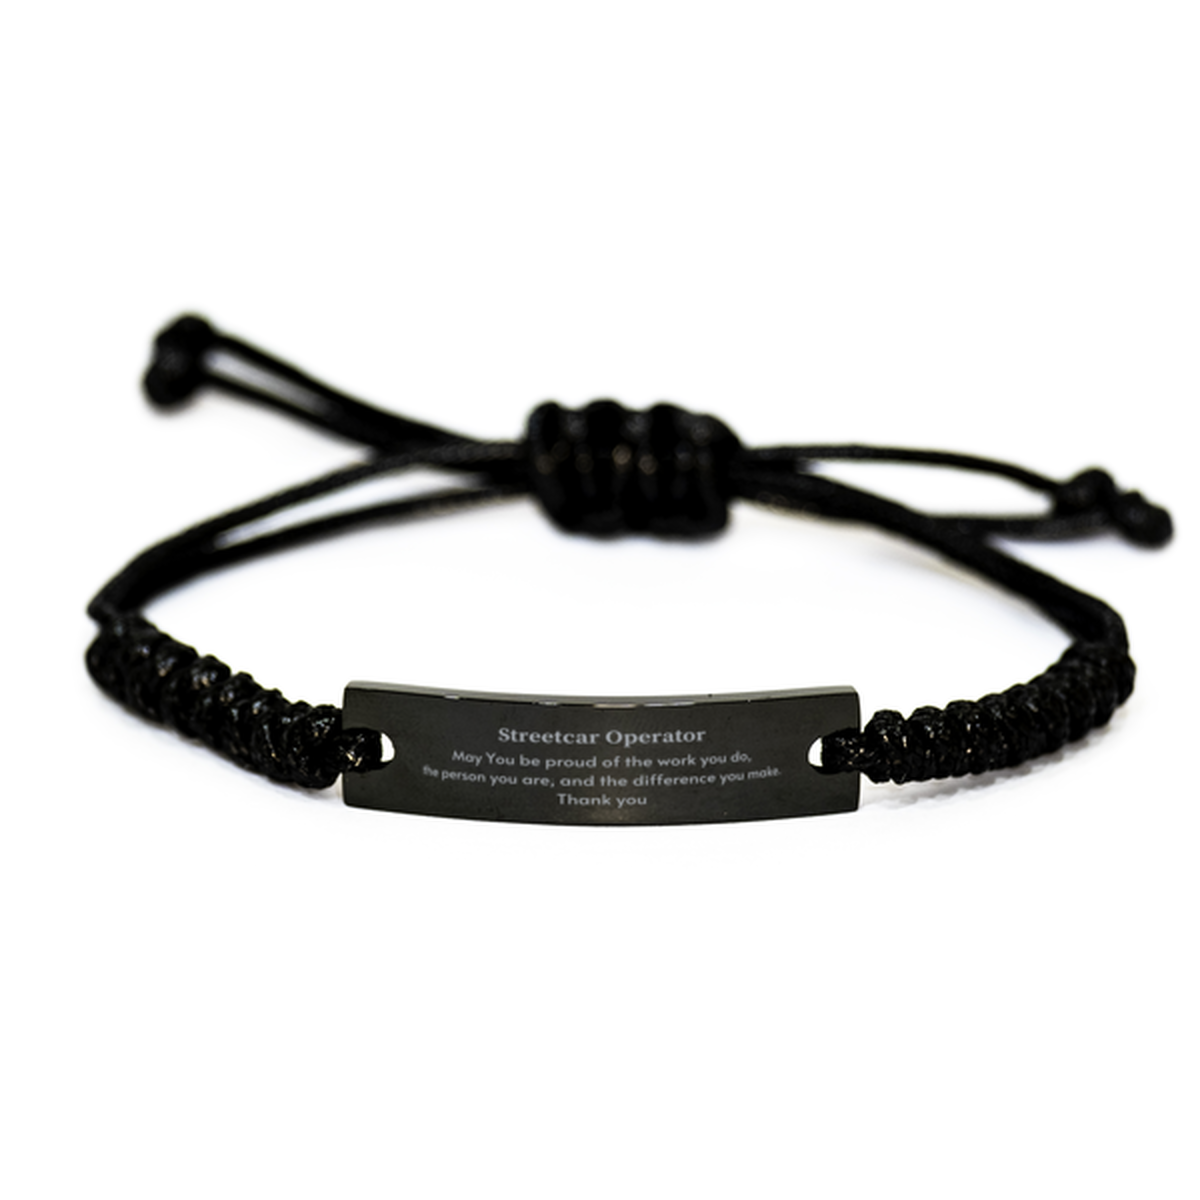 Heartwarming Black Rope Bracelet Retirement Coworkers Gifts for Streetcar Operator, Streetcar Operator May You be proud of the work you do, the person you are Gifts for Boss Men Women Friends